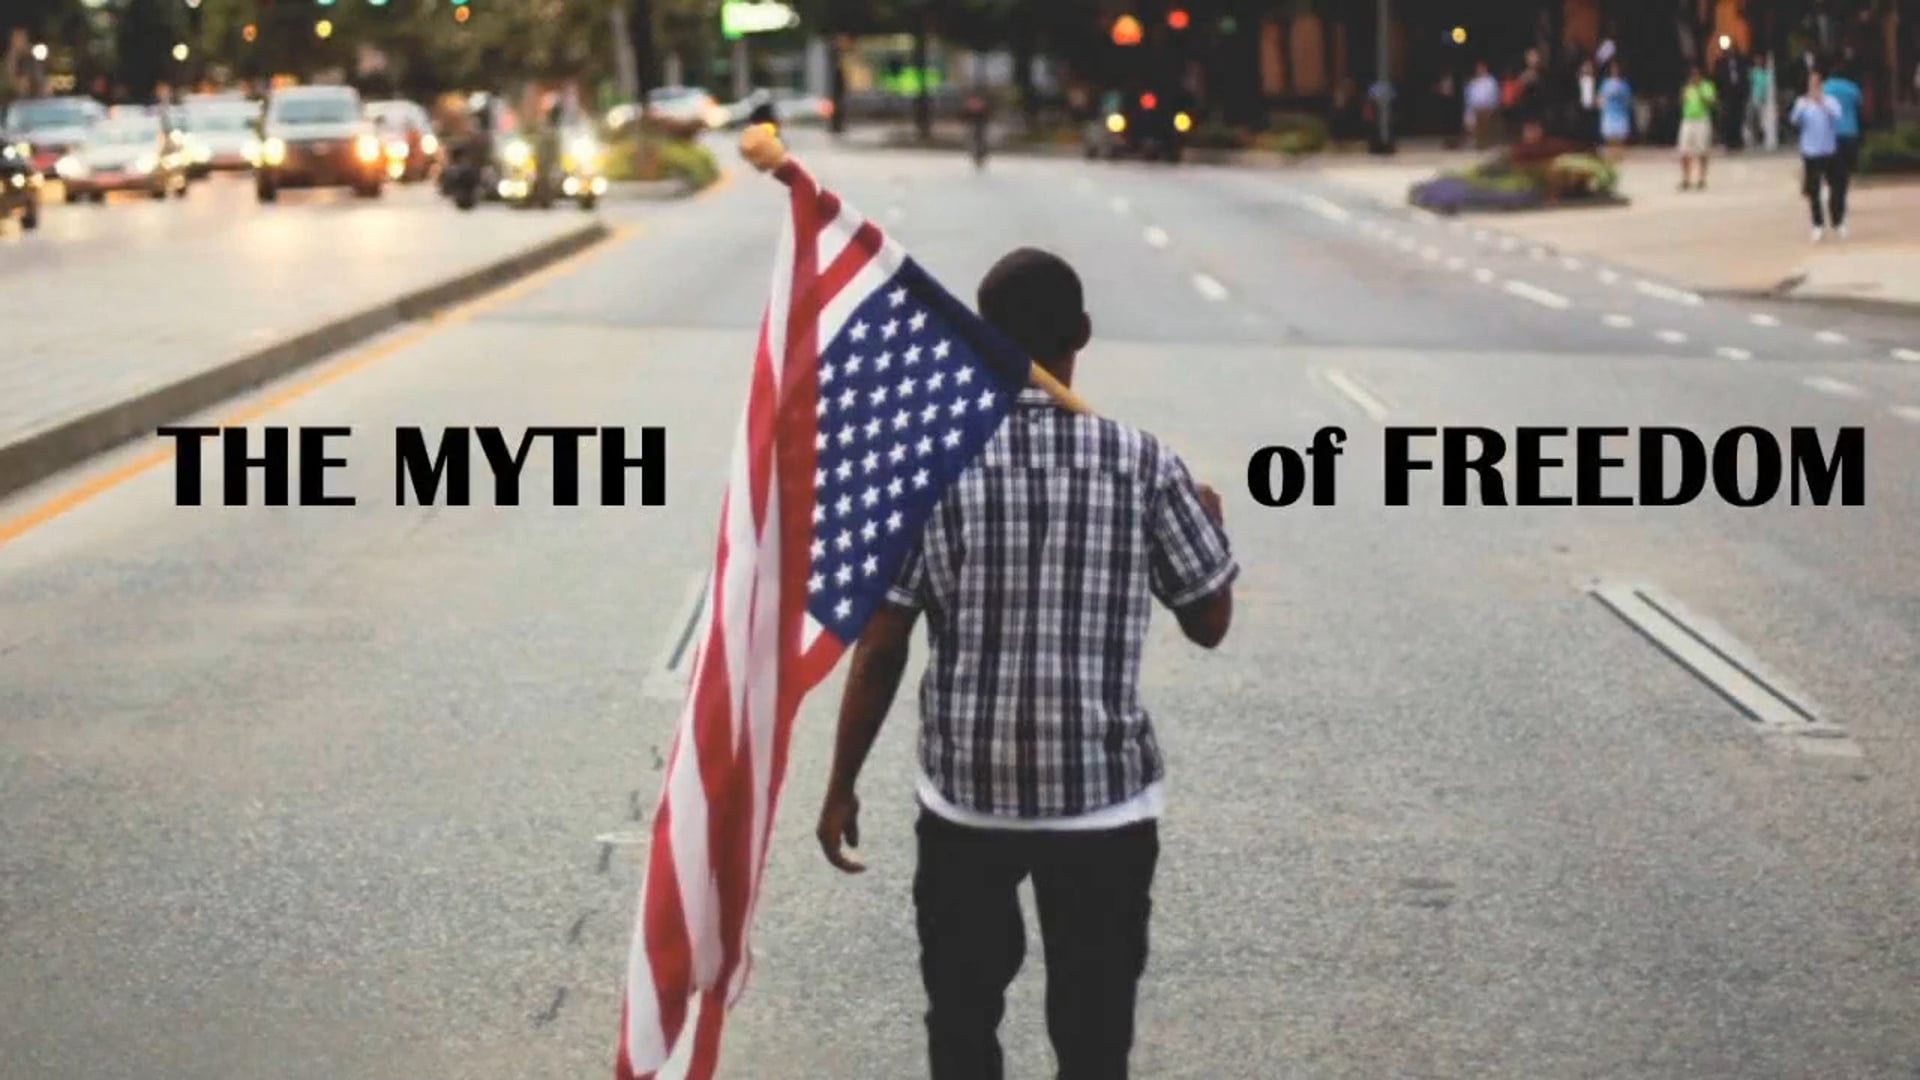 Juneteenth Special 2021 - The Myth of Freedom